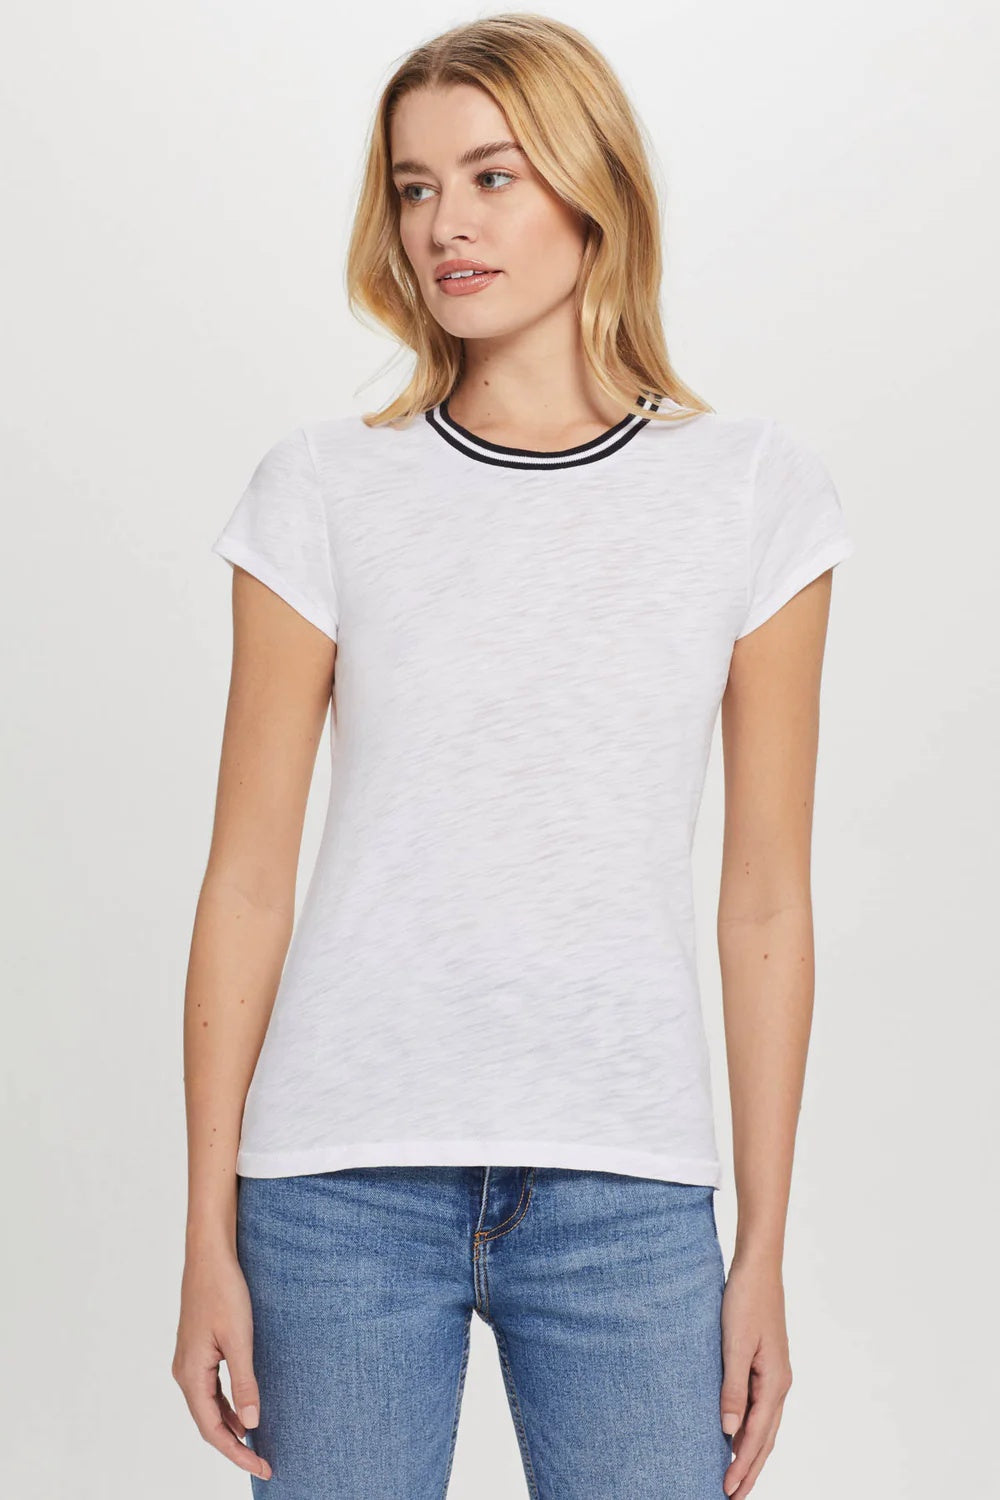 Goldie Tipped Ringer Tee - White